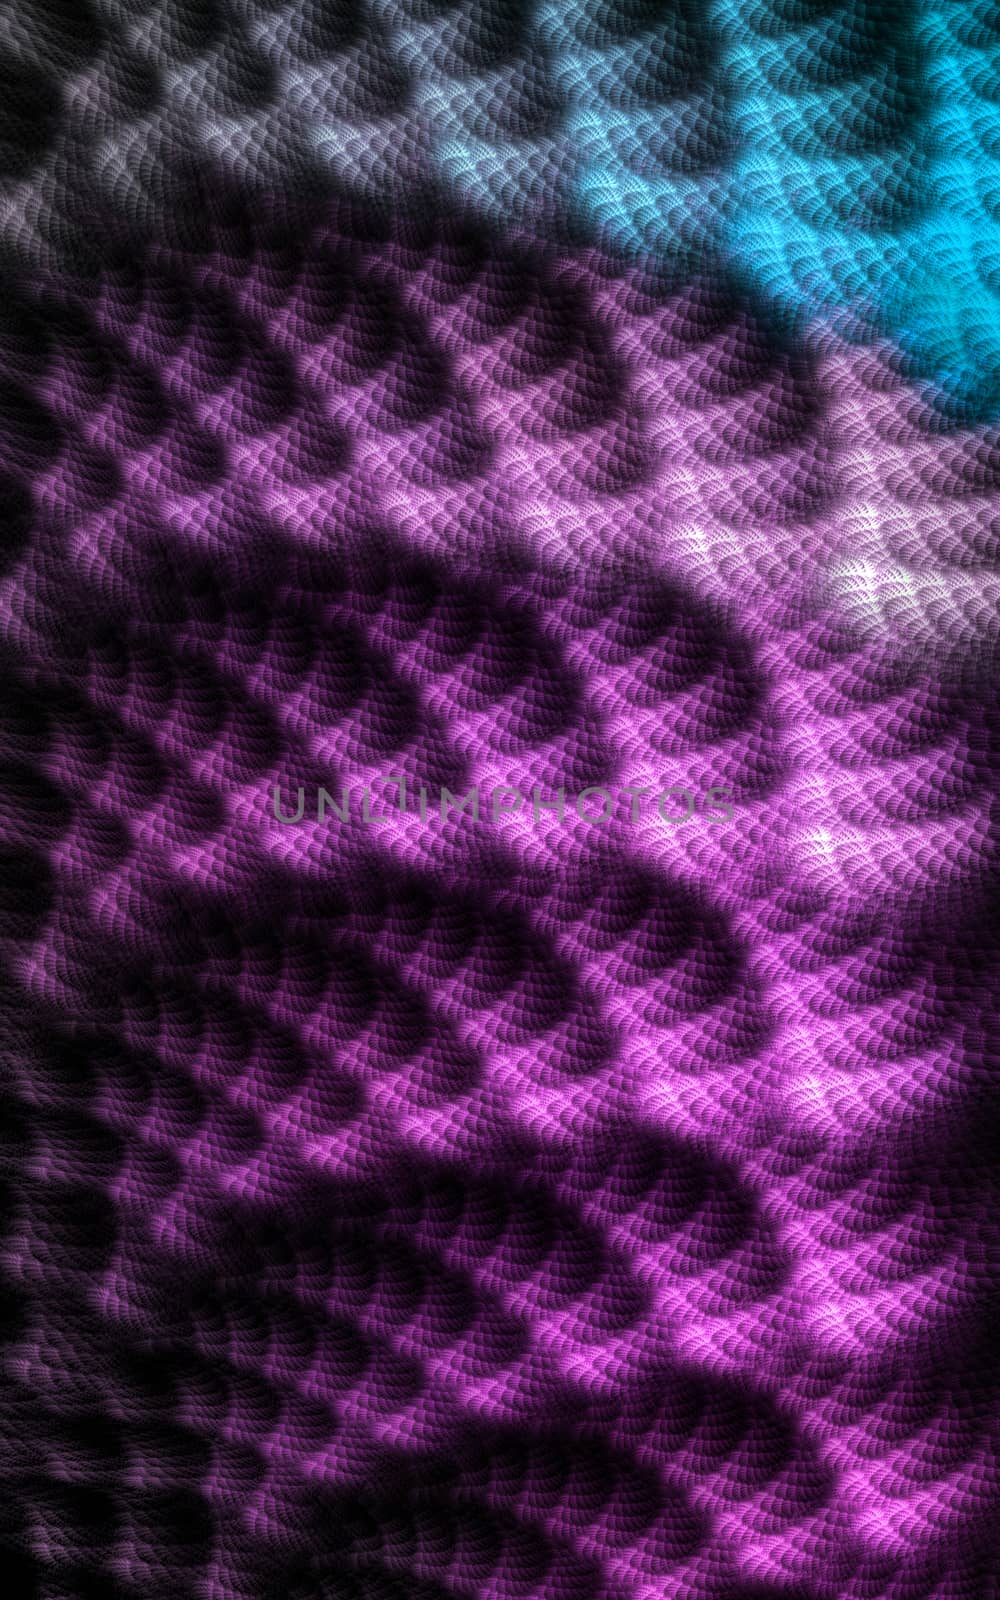 A scaly, fractal skin texture.